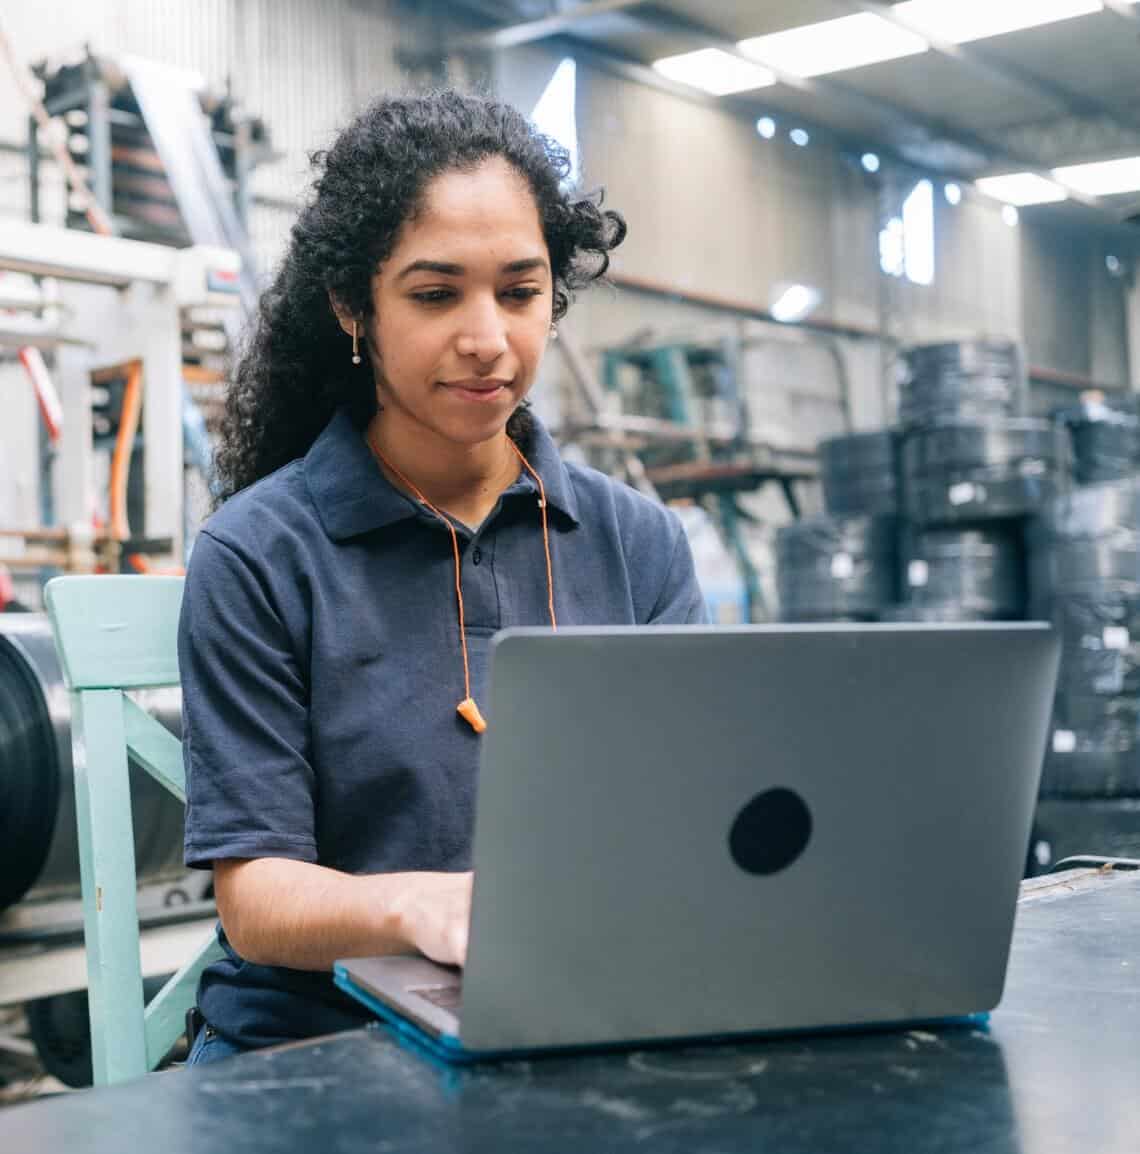 Woman working on a laptop in a warehouse